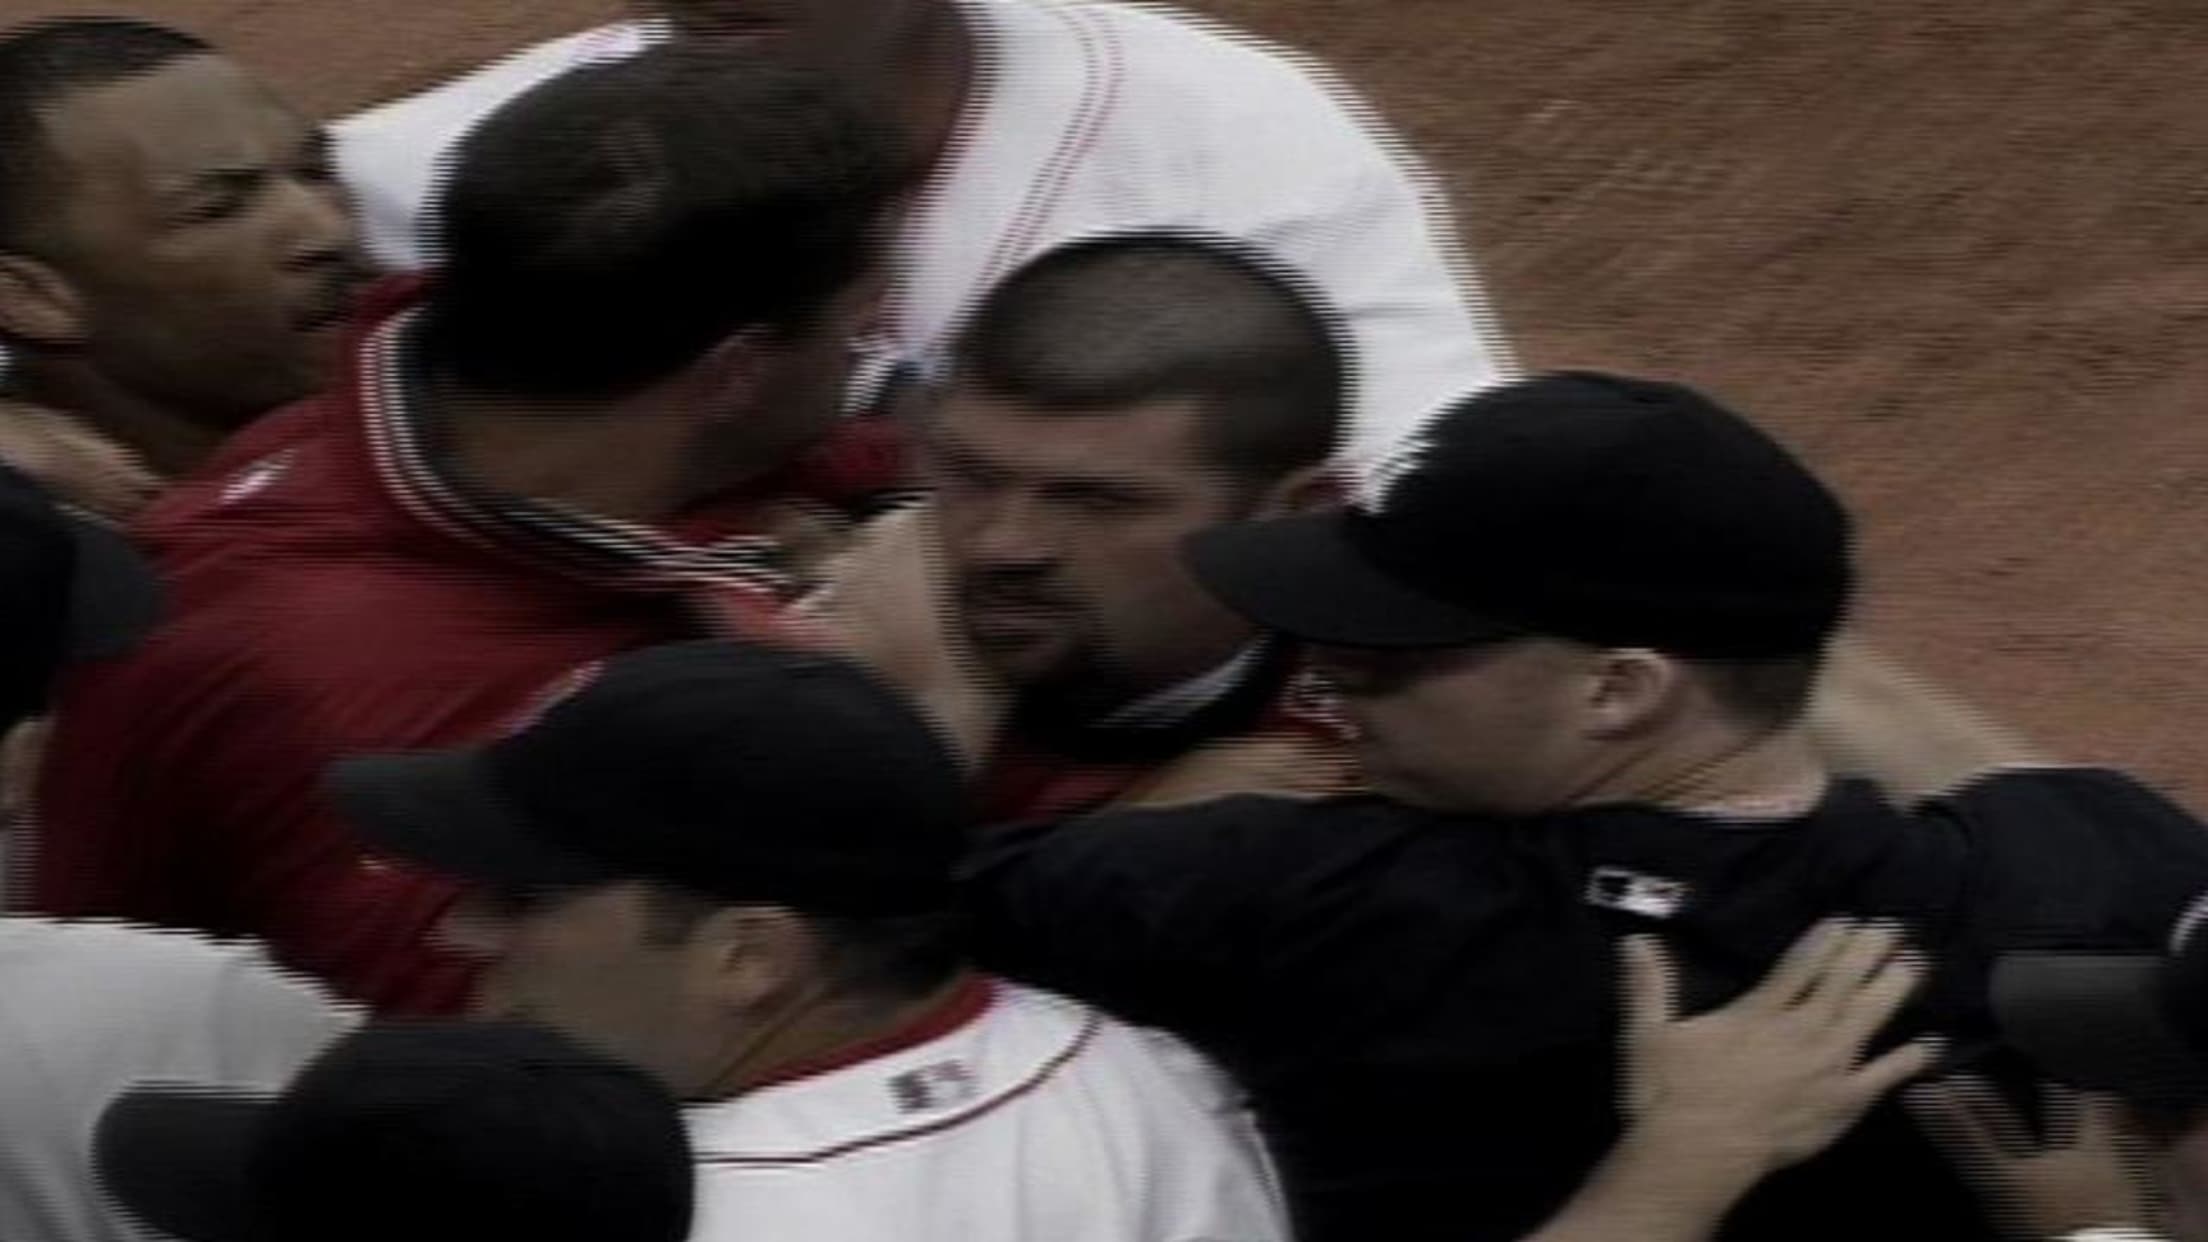 Jason Varitek and Alex Rodriguez were great sparring partners in that epic ...